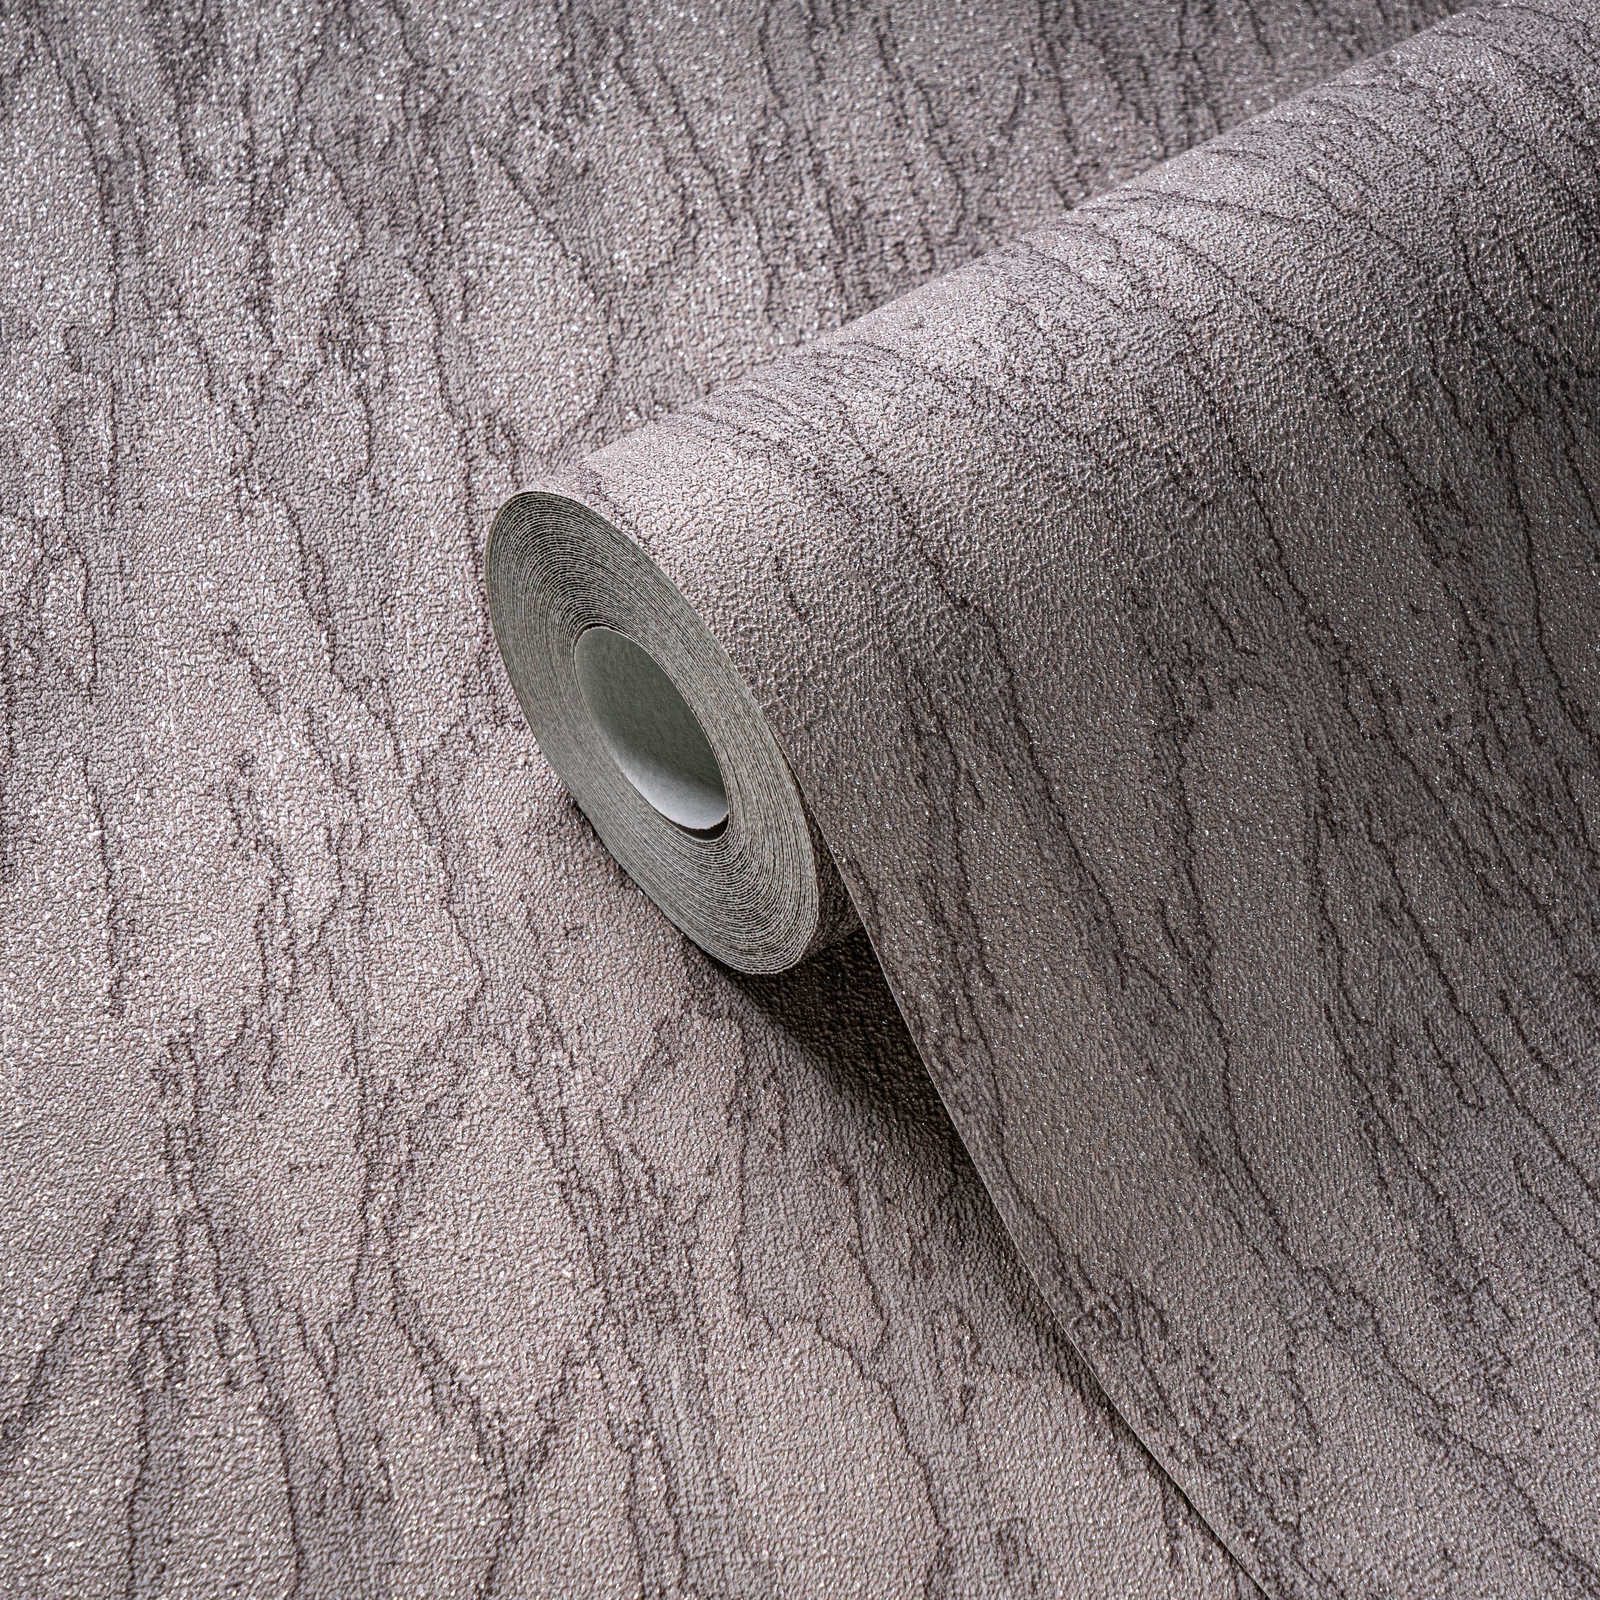             Non-woven wallpaper in plaster look with accents and abstract pattern - grey, beige, silver
        